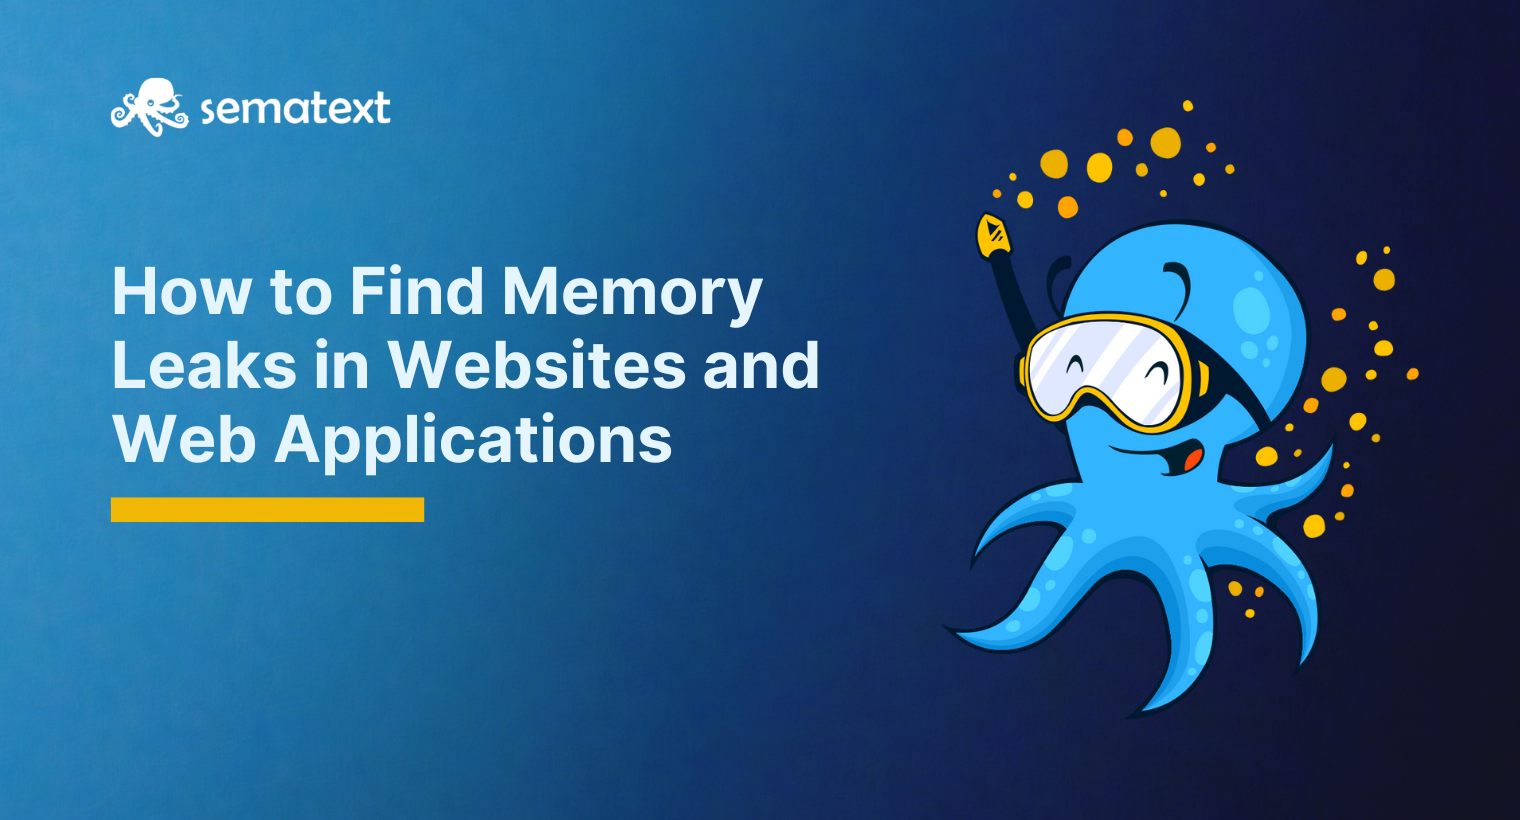 How to Find Memory Leaks in Websites and Web Applications